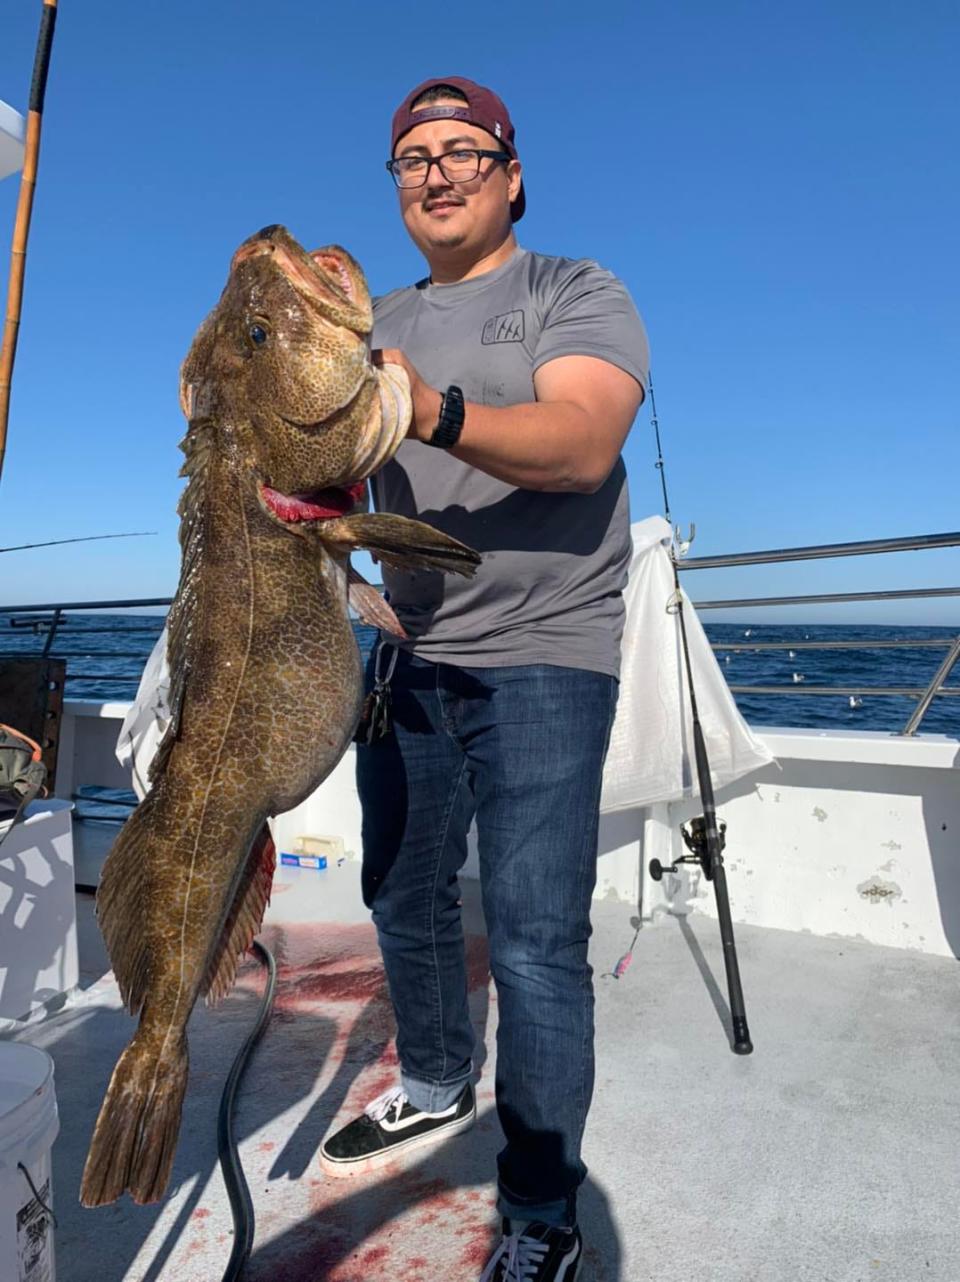 Big lingcod like this one are being caught on fishing adventures to the Farallon Islands and Marin County Coast. This fisherman landed this impressive lingcod while fishing at the Farallon Islands with California Dawn Sportfishing on Oct. 19, 2022.